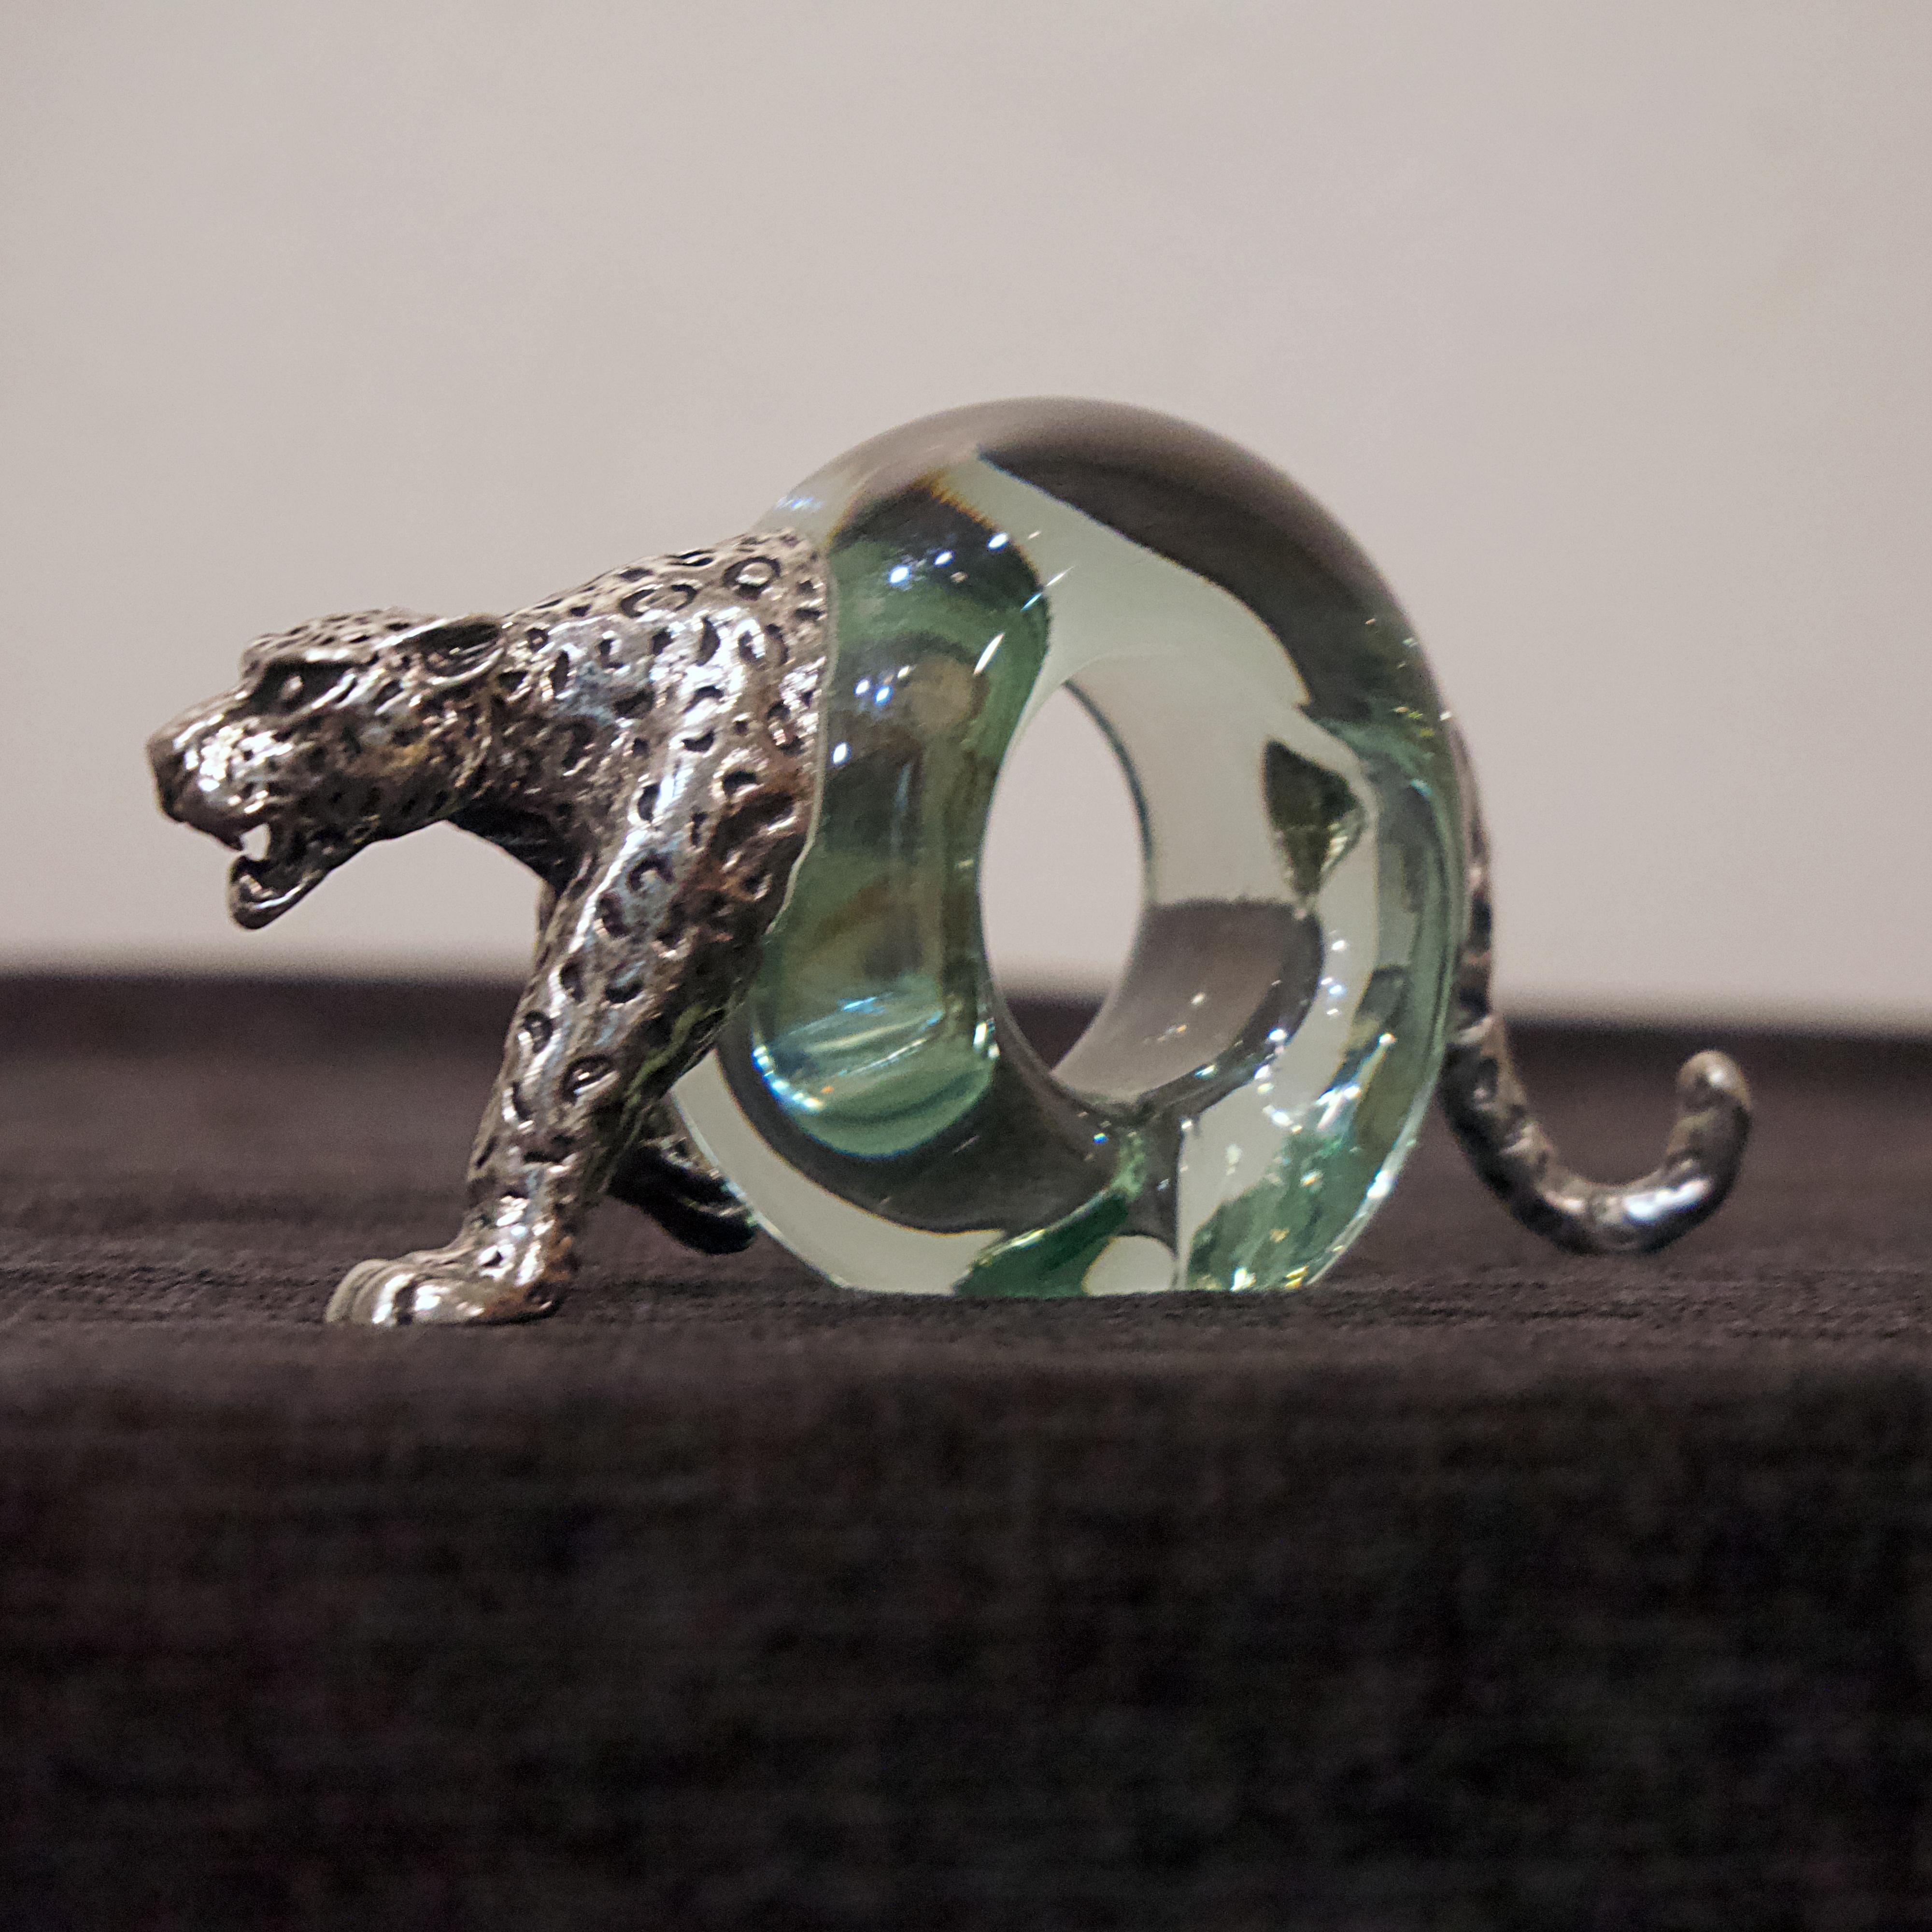 Set of 8 Pewter and Glass Animal Napkin Rings 4